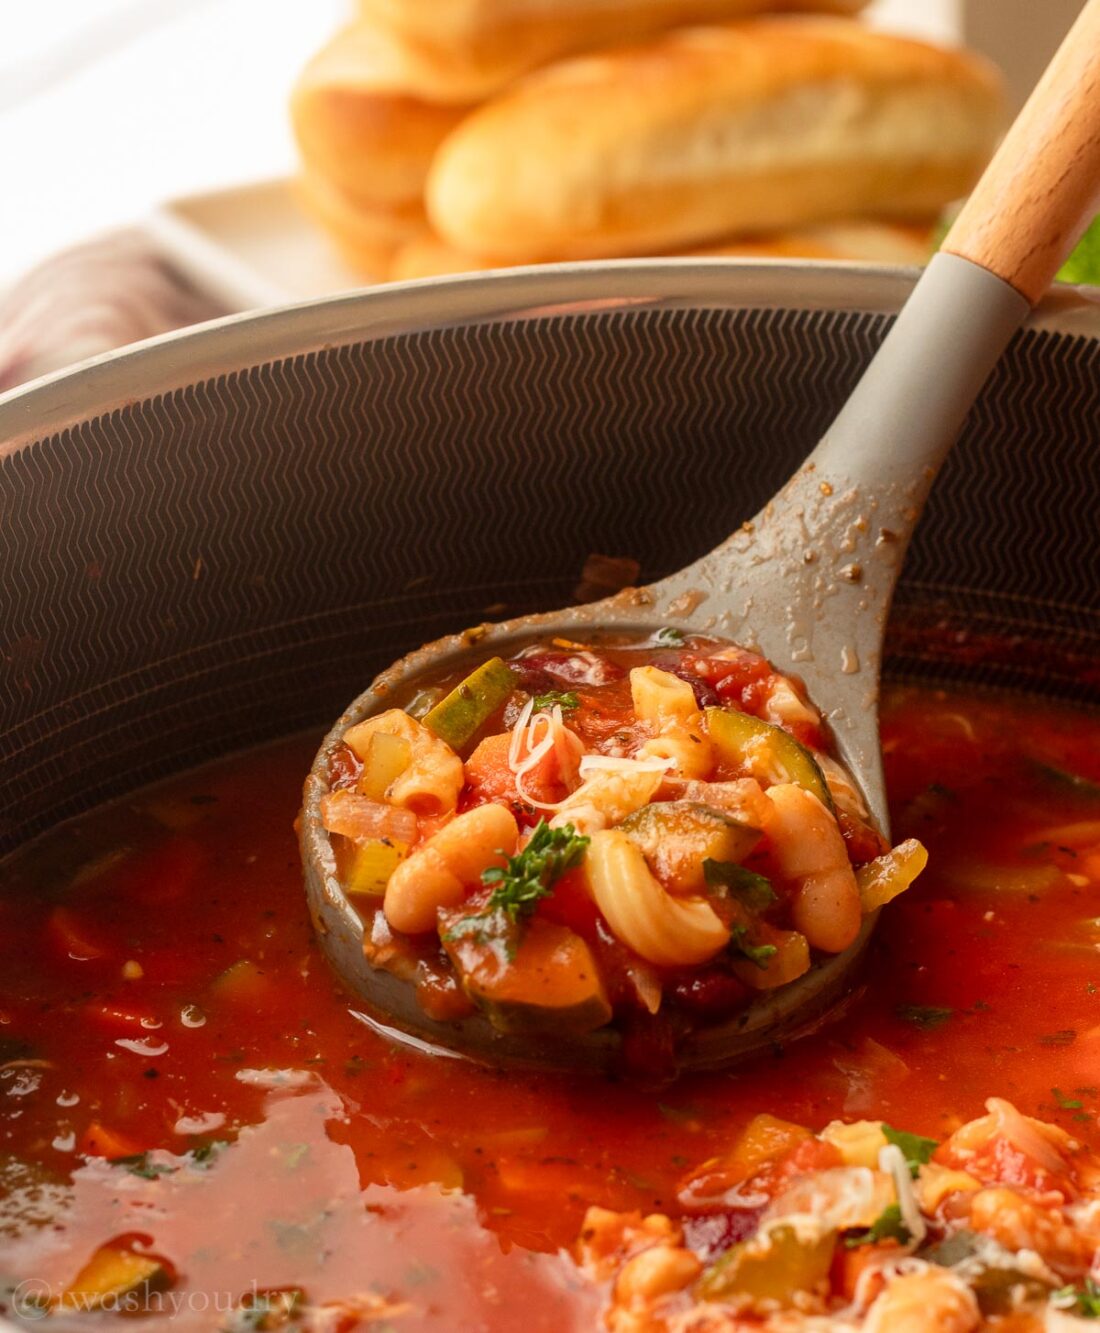 ladle filled with minestrone soup and beans with pasta.